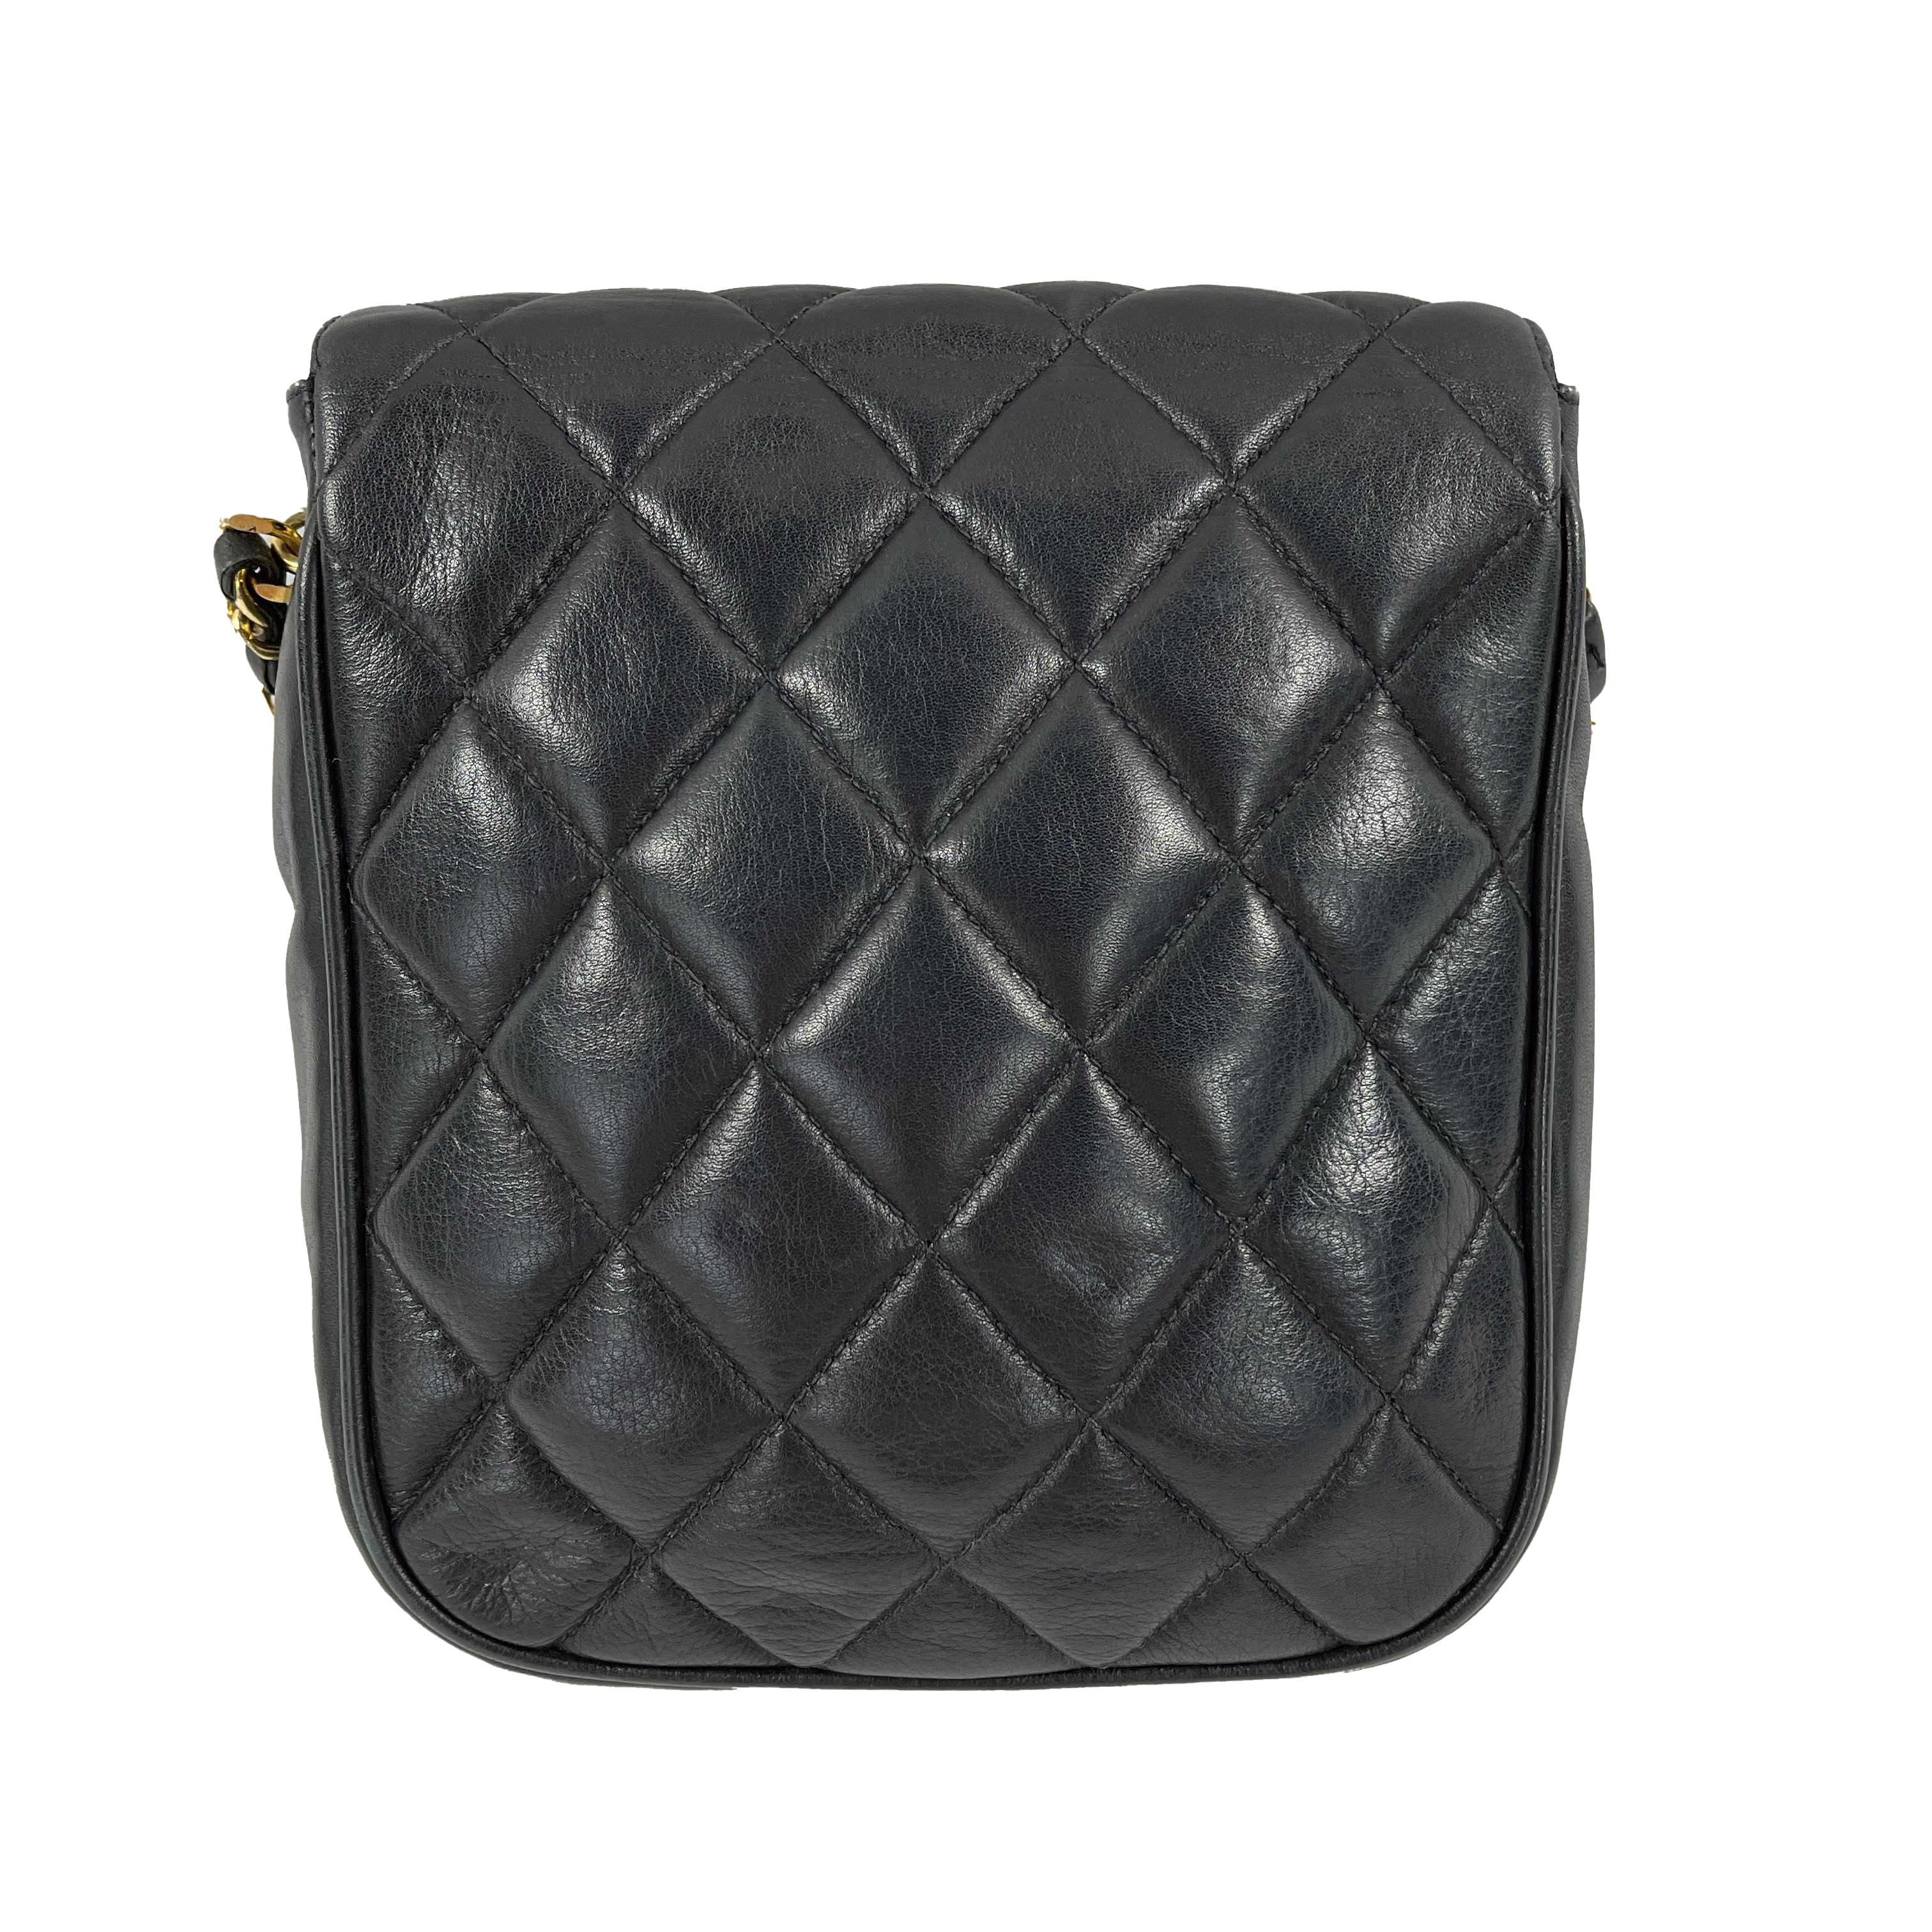 CHANEL - Vintage Small Black Quilted CC Lambskin Flap Crossbody / Shoulder Bag 

Description

Vintage.
Late 80s-early 90s era.
This lambskin leather quilted small flap bag can be worn crossbody or on the shoulder.
One zip pocket inside.
CC logo turn